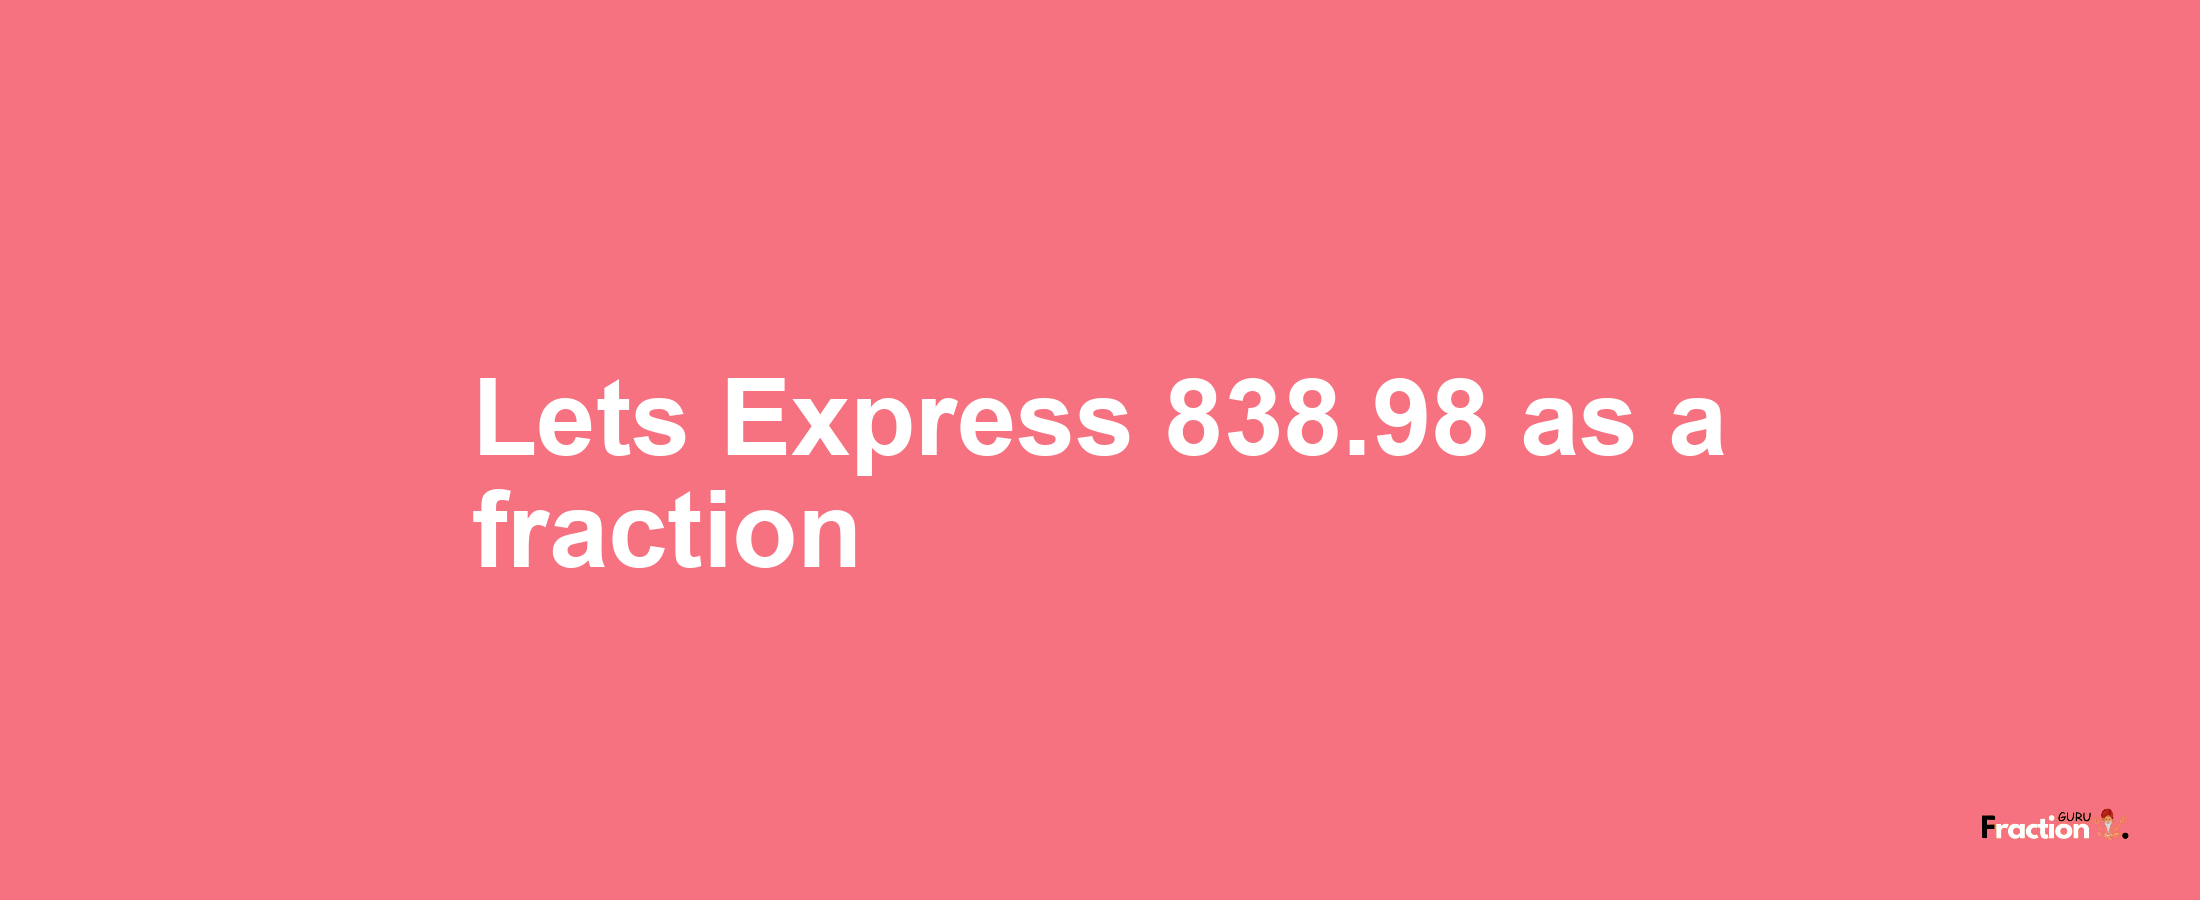 Lets Express 838.98 as afraction